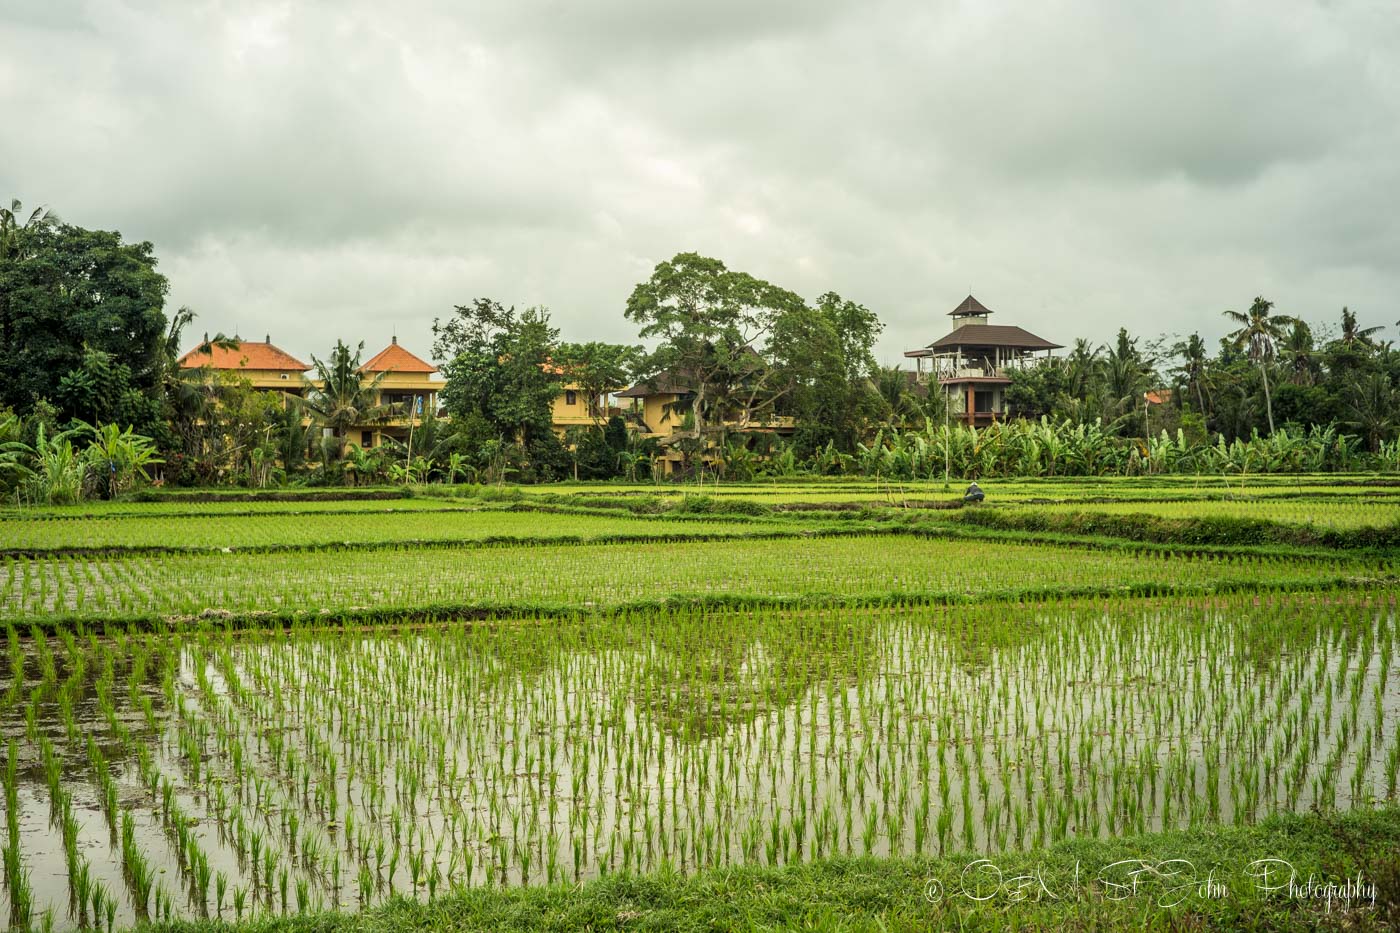 Rice paddy fields in Bali, Indonesia